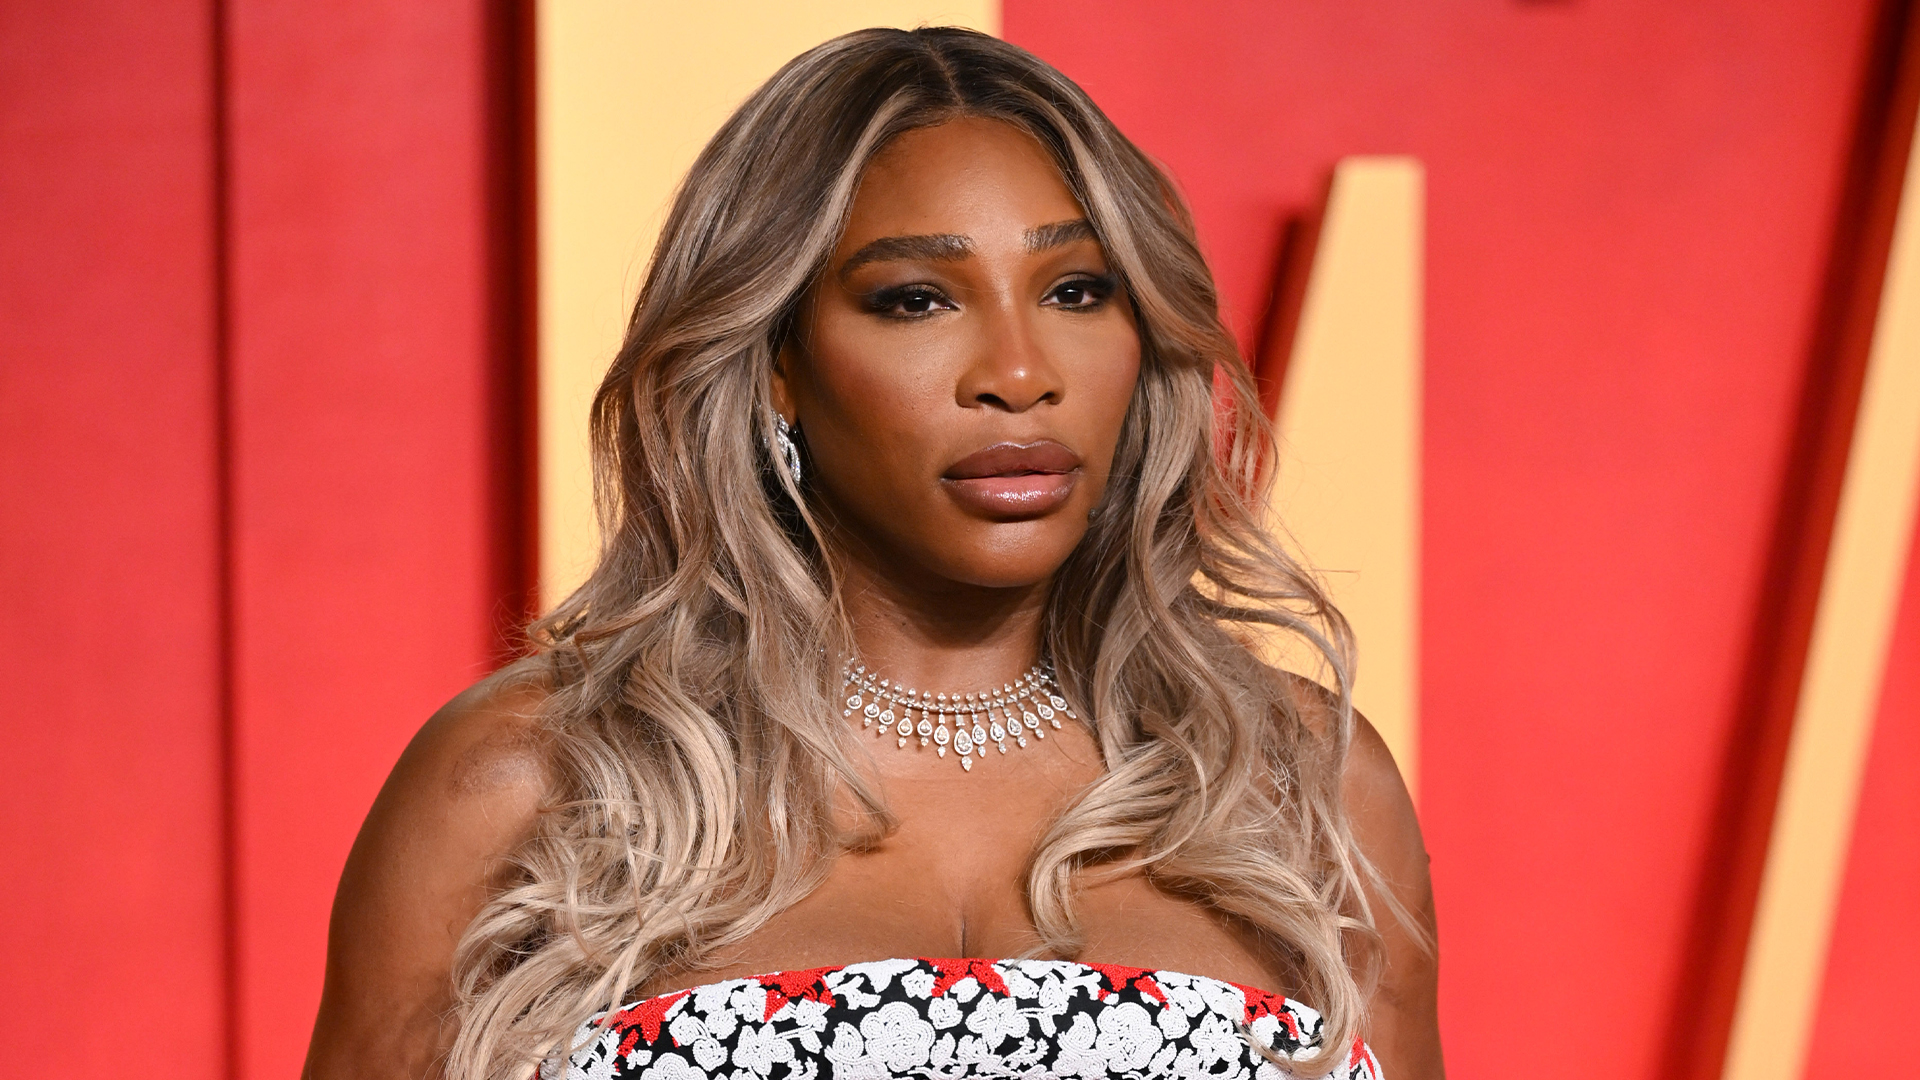 Serena Williams Has Invested In 14 Companies That Have Gone On To Reach Unicorn Status, A Value Of $1B Or More